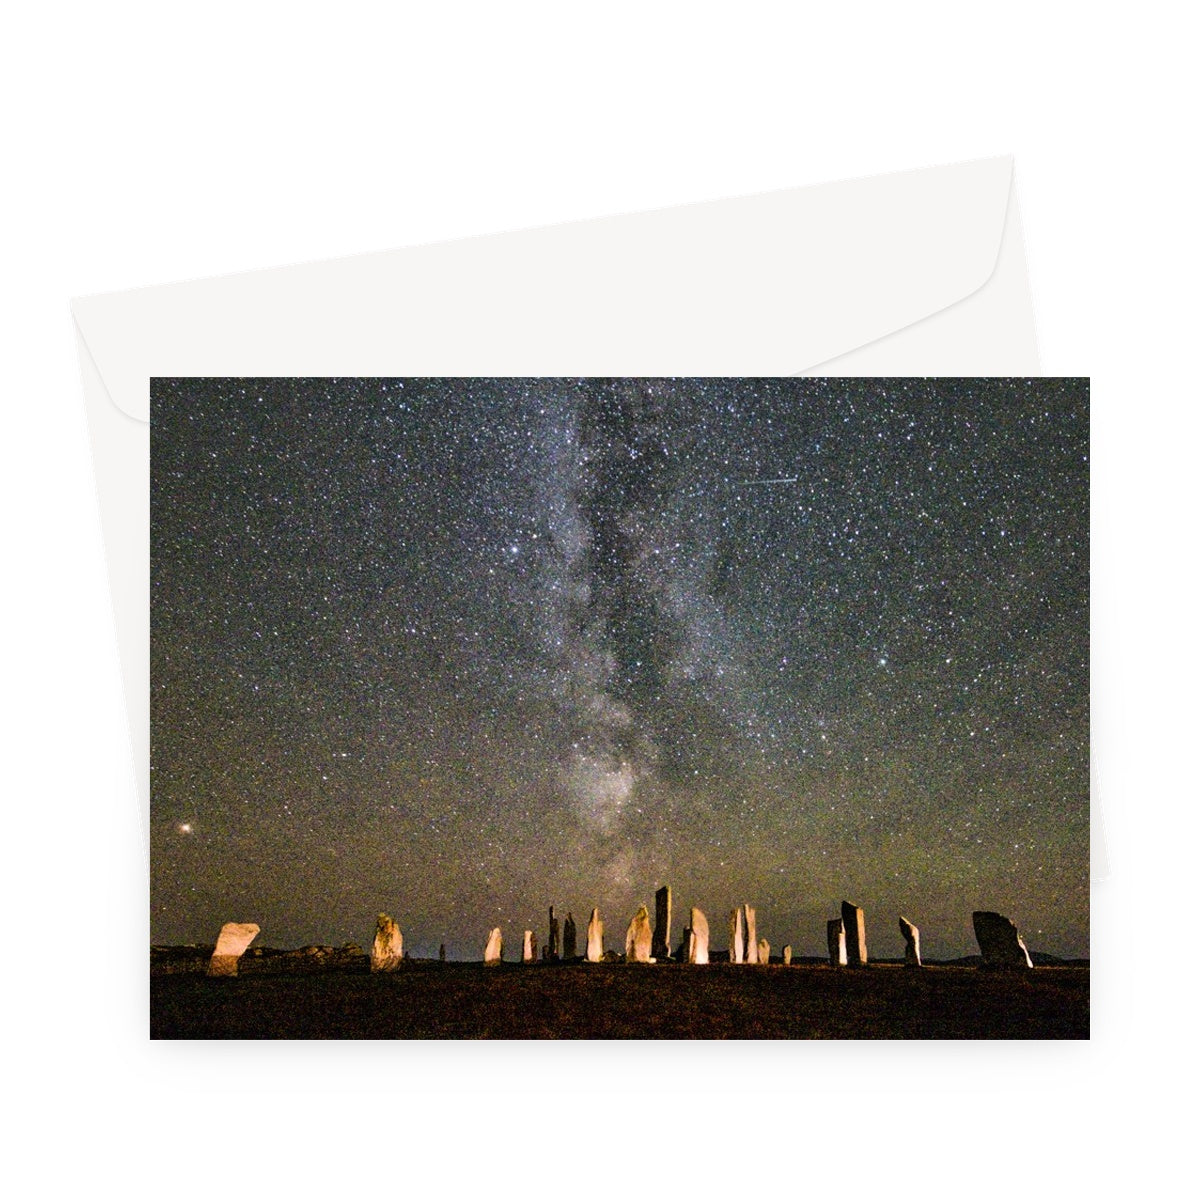 Callanish and the Milky Way  Greeting Card